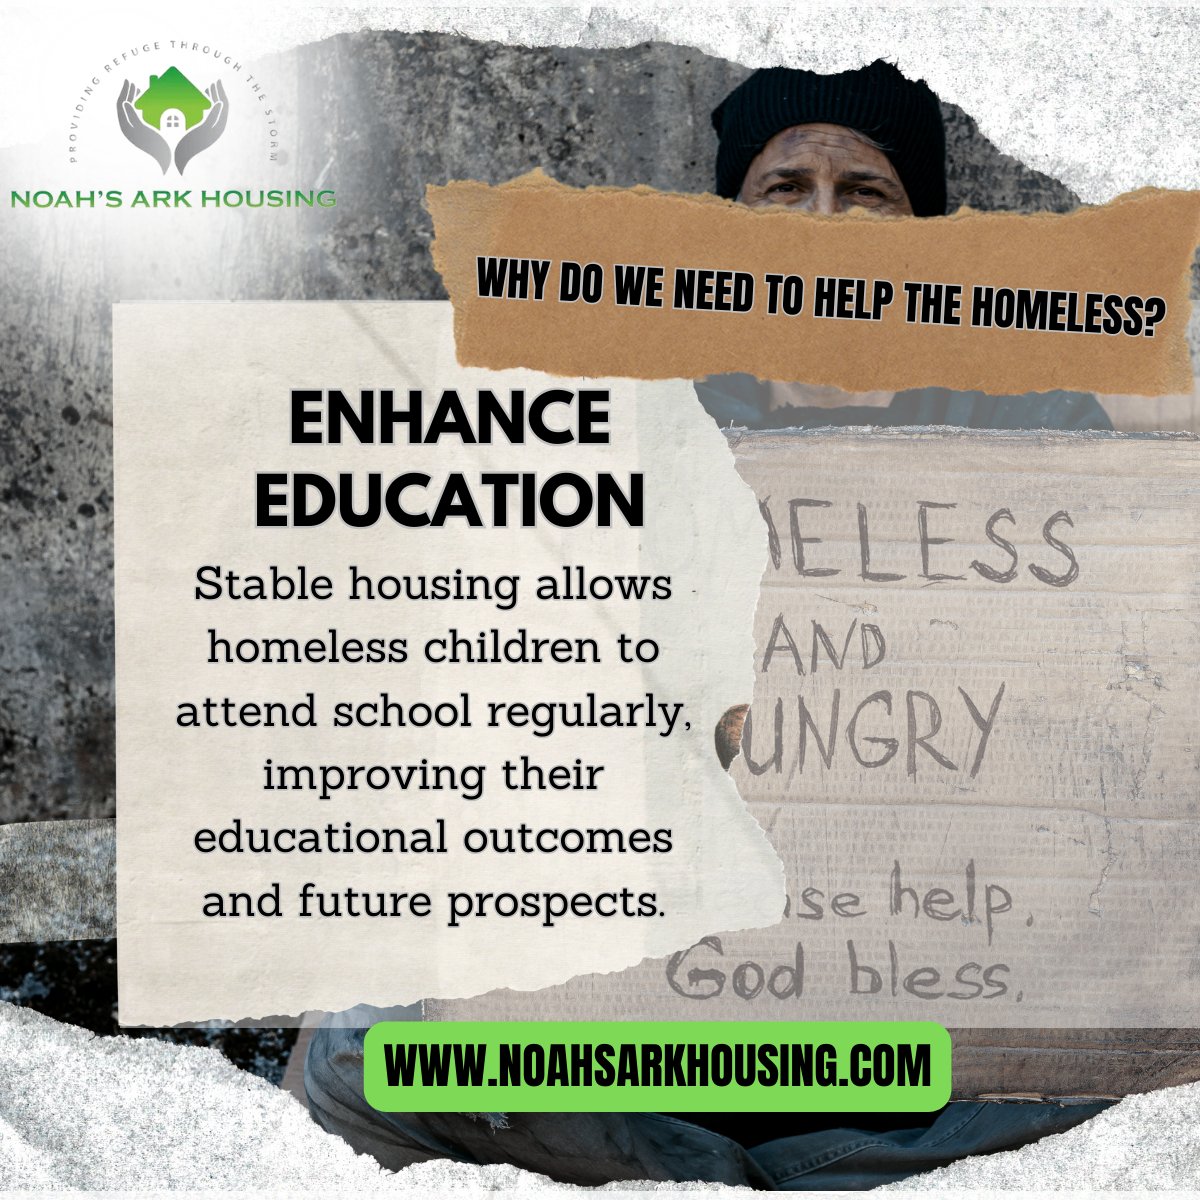 Building Brighter Futures: 🏠✨ Stable housing is the key to better education for homeless children. Join us to make a difference and ensure every child has a chance to thrive. 💪📚 #SupportTheHomeless #EducationMatters #NoahsArkHousing